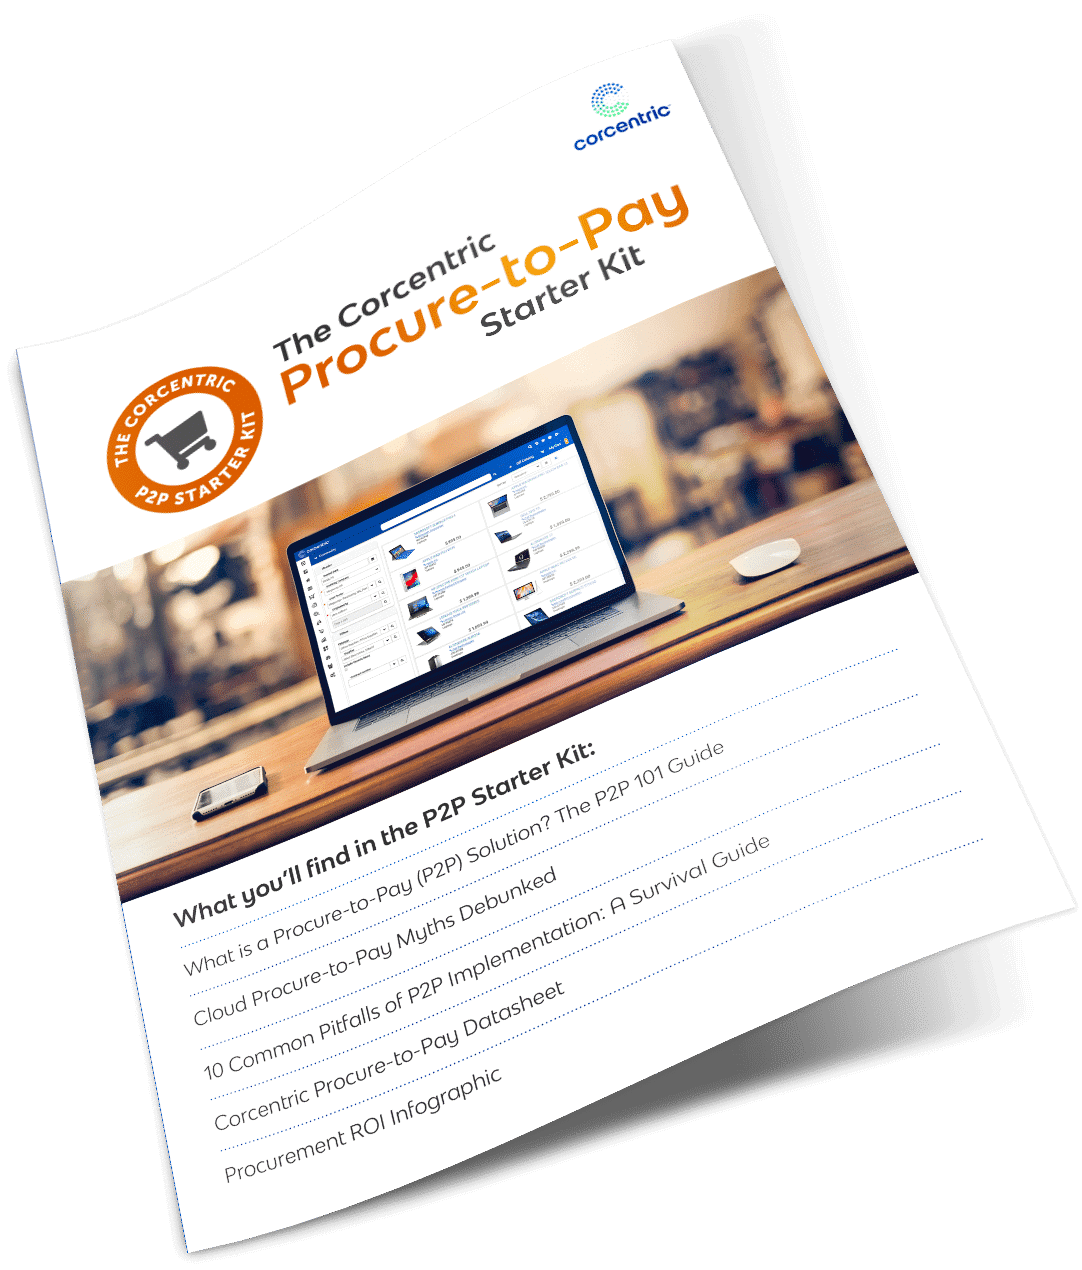 Corcentric White Paper: Procure-to-Pay Starter Kit